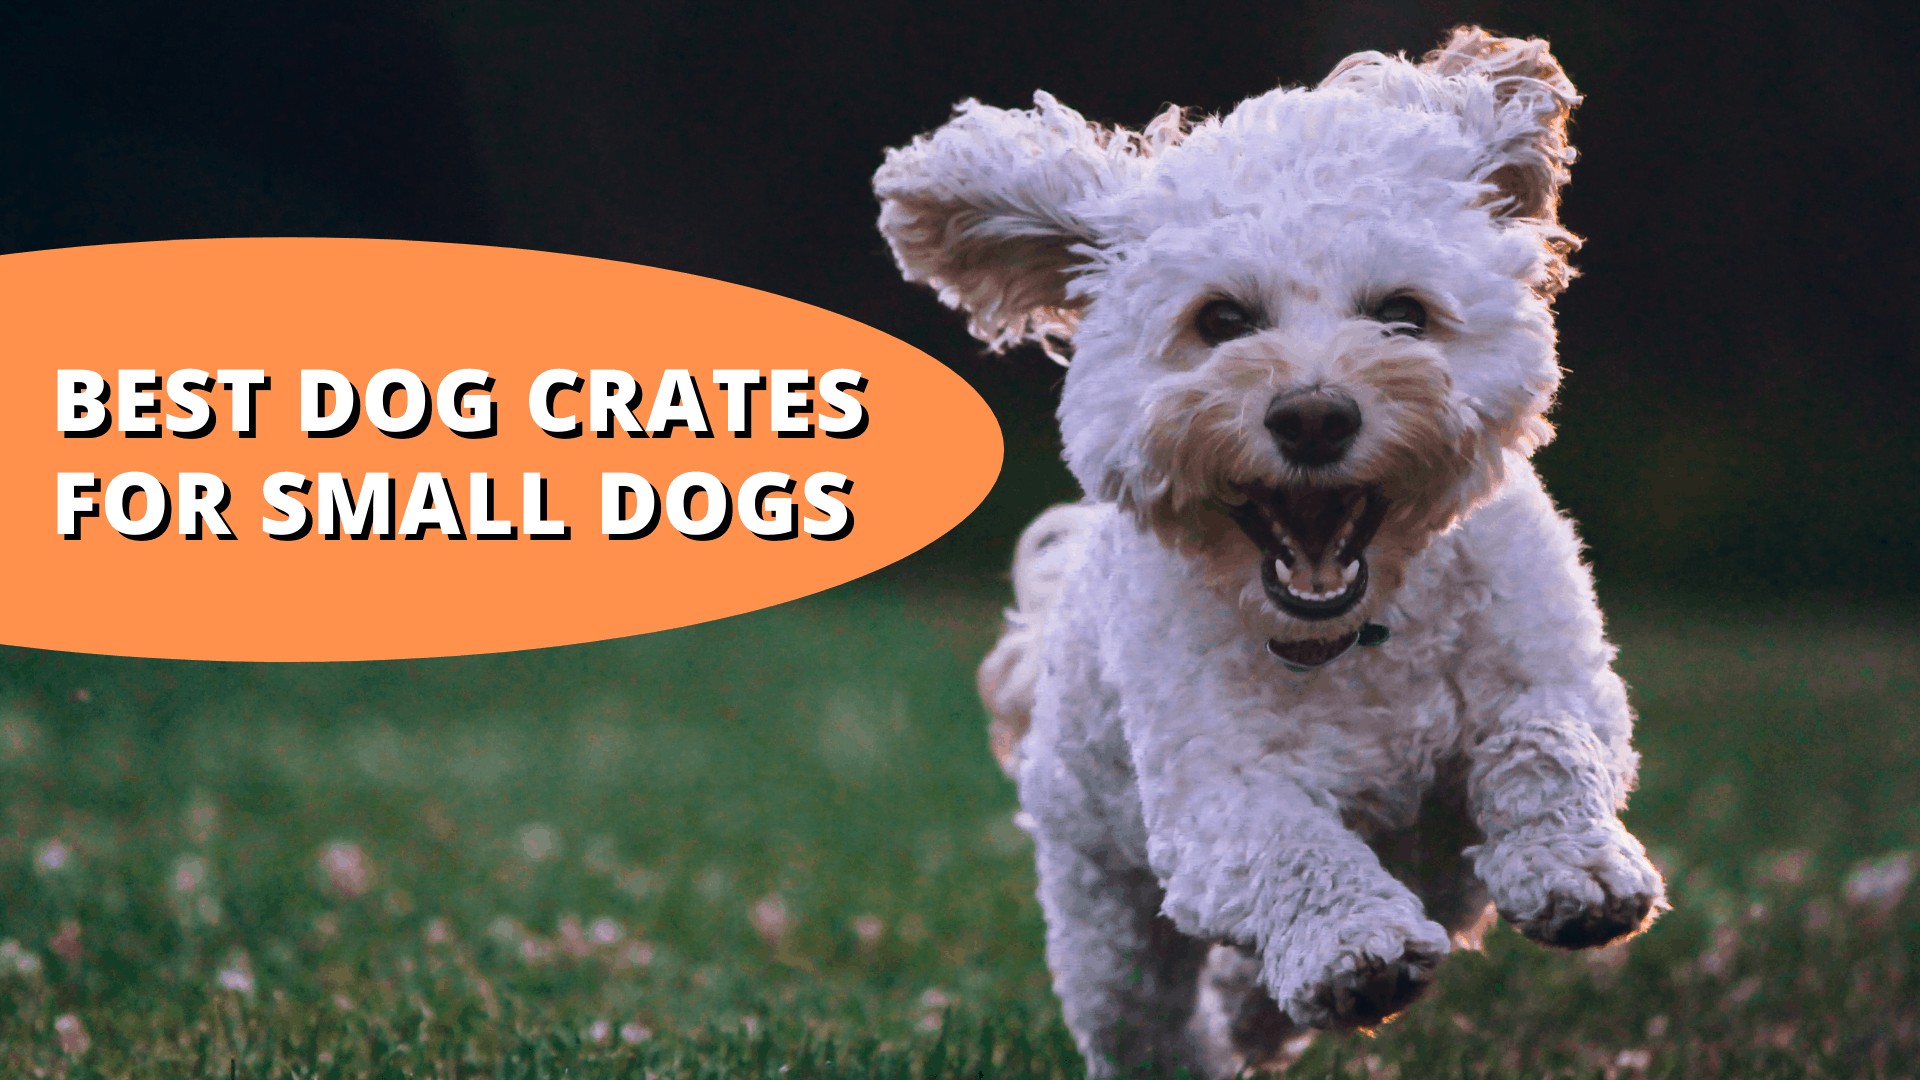 The 27 Best Dog Crates For Small Dogs & Puppies In 2022